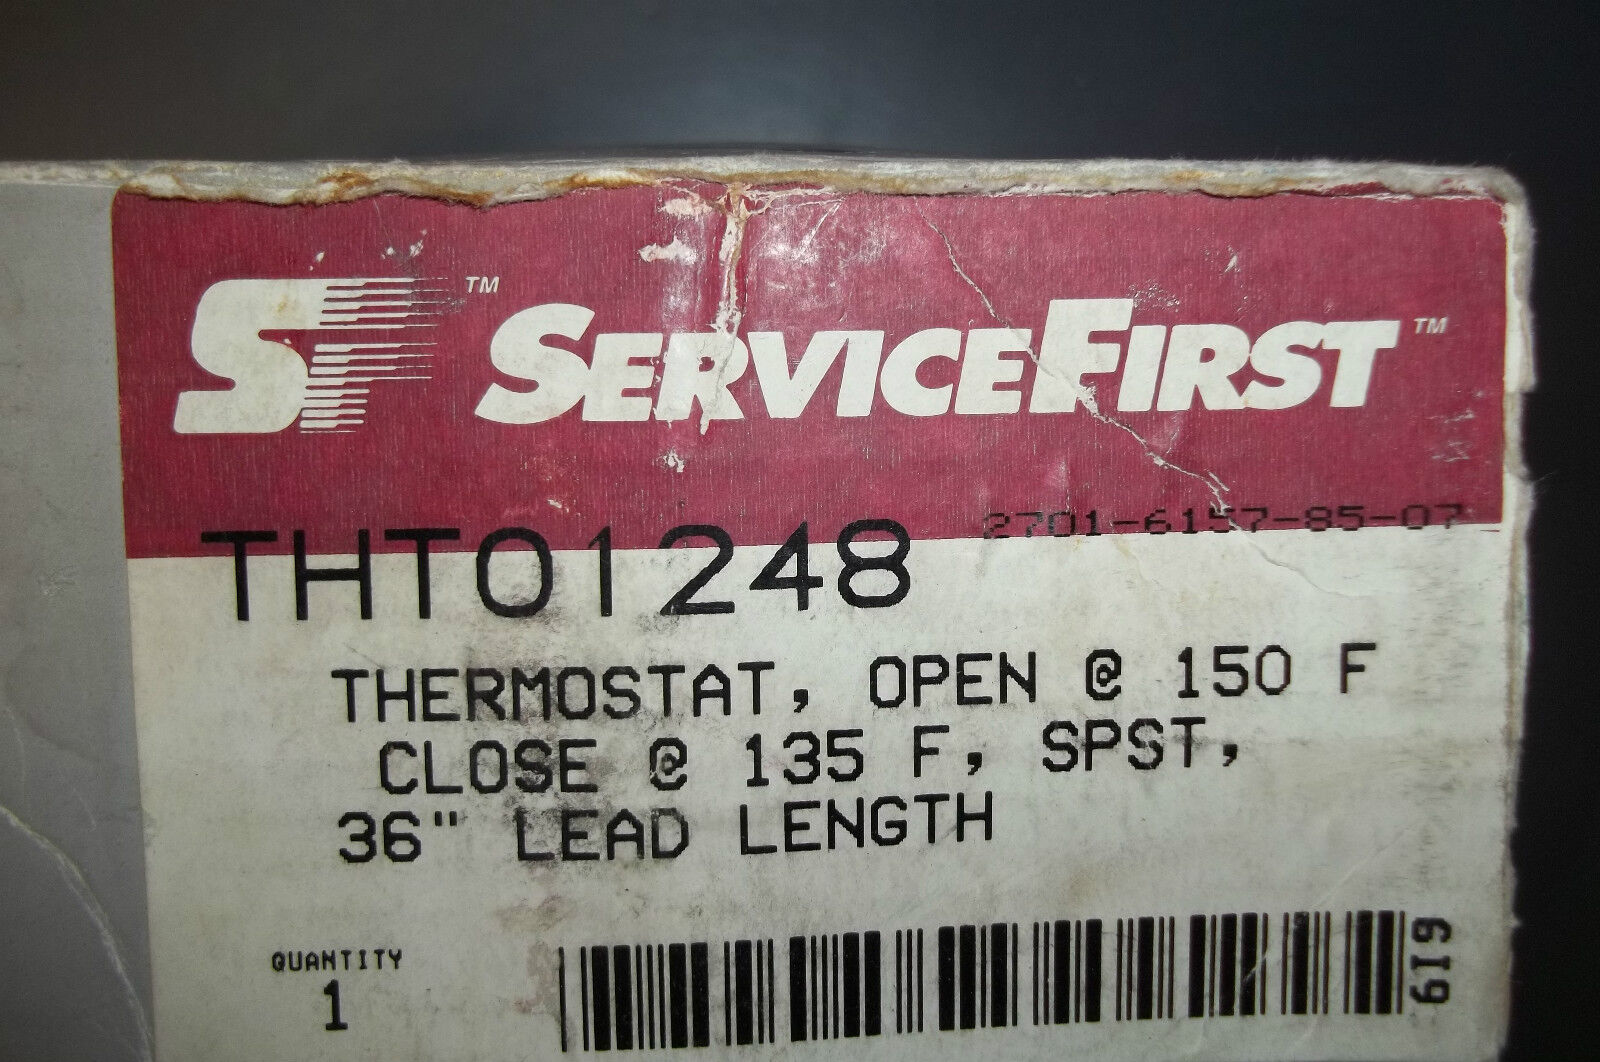 Service First THT 01248 thermostat, open 150F, close 135F NEW